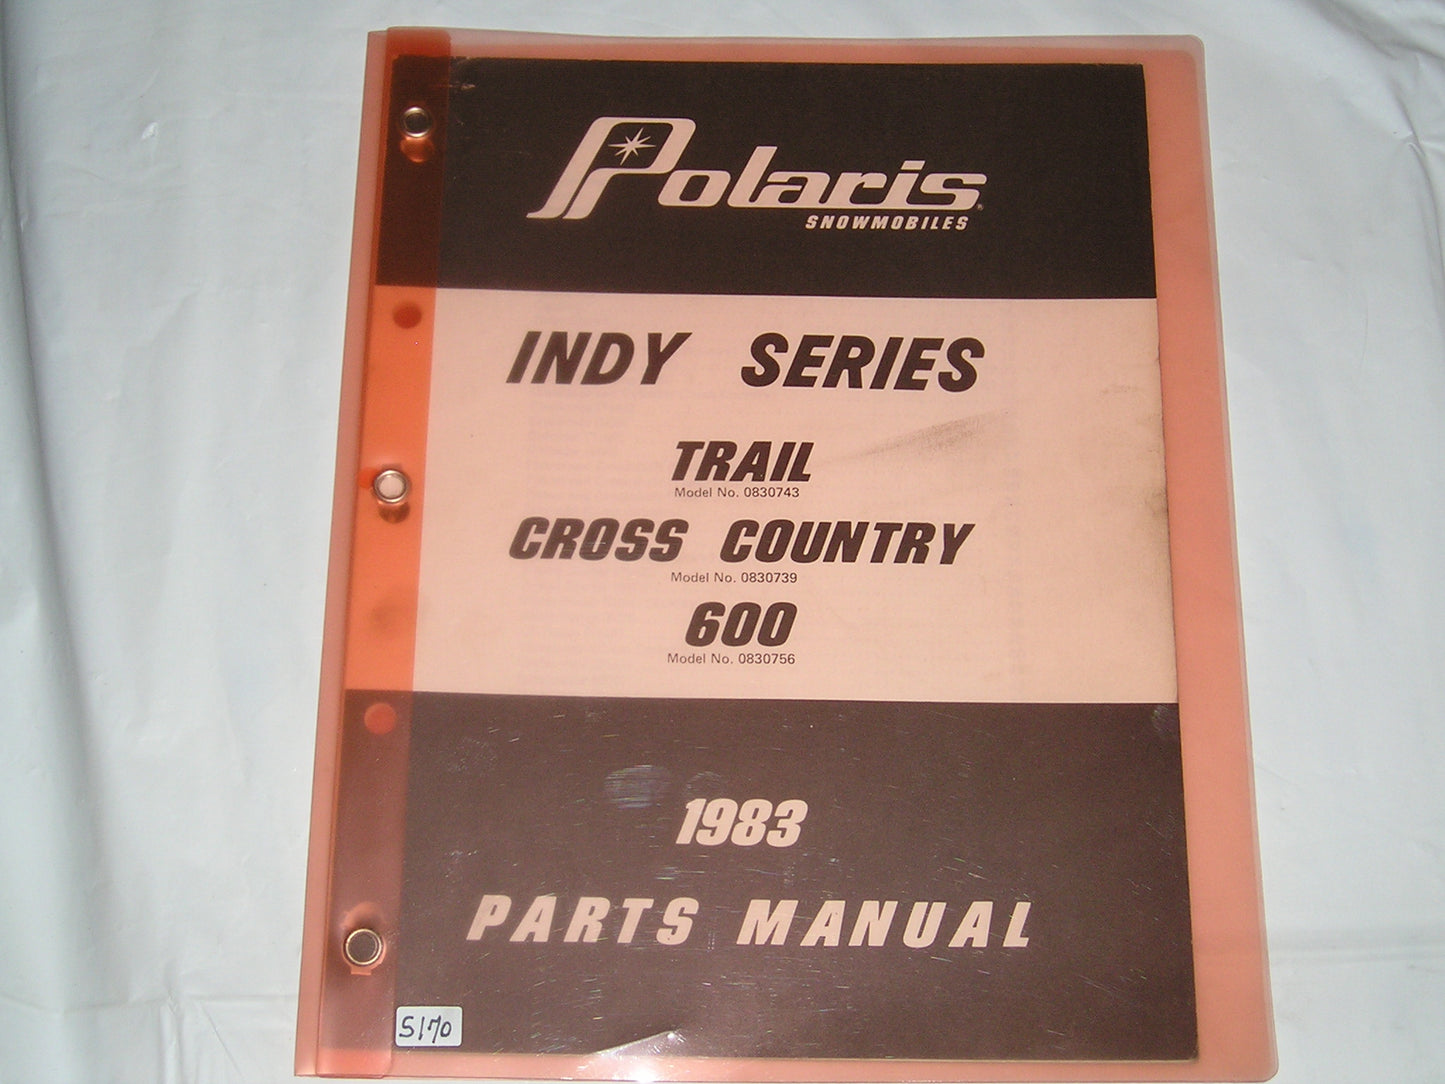 POLARIS Indy Series  Trail / Cross Country / 600  1983  Parts Catalogue  9910812  #S170